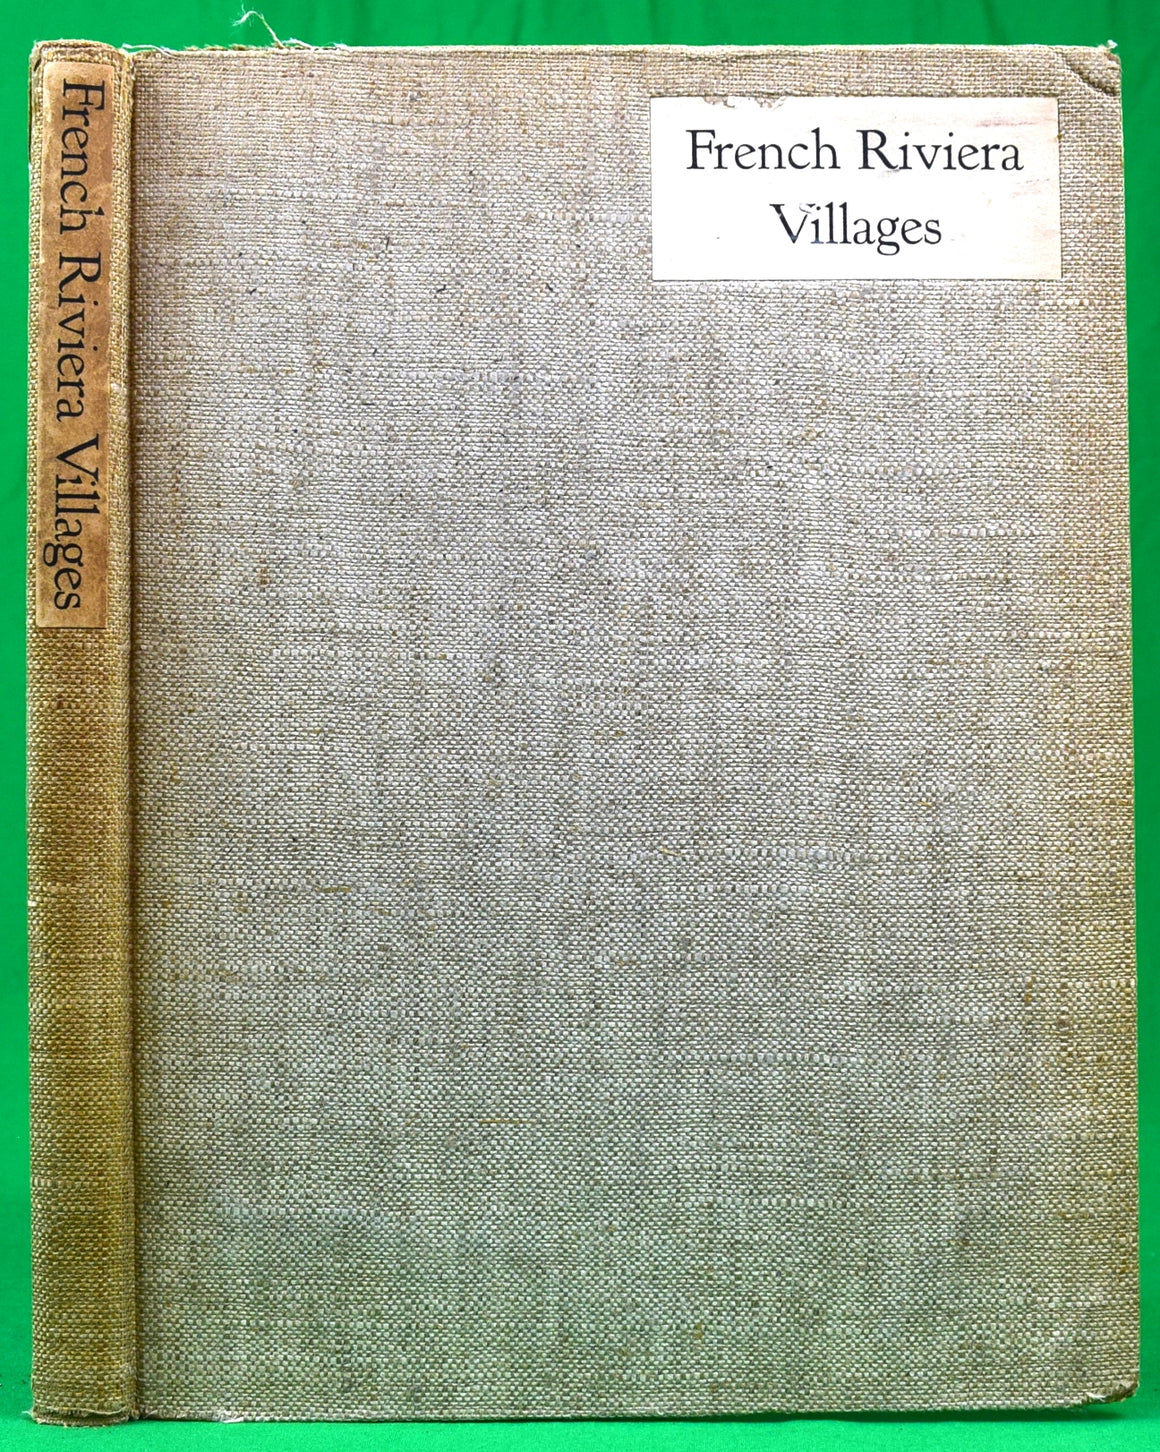 "French Riviera Villages" 1938 THOMPSON, Virginia [text by]